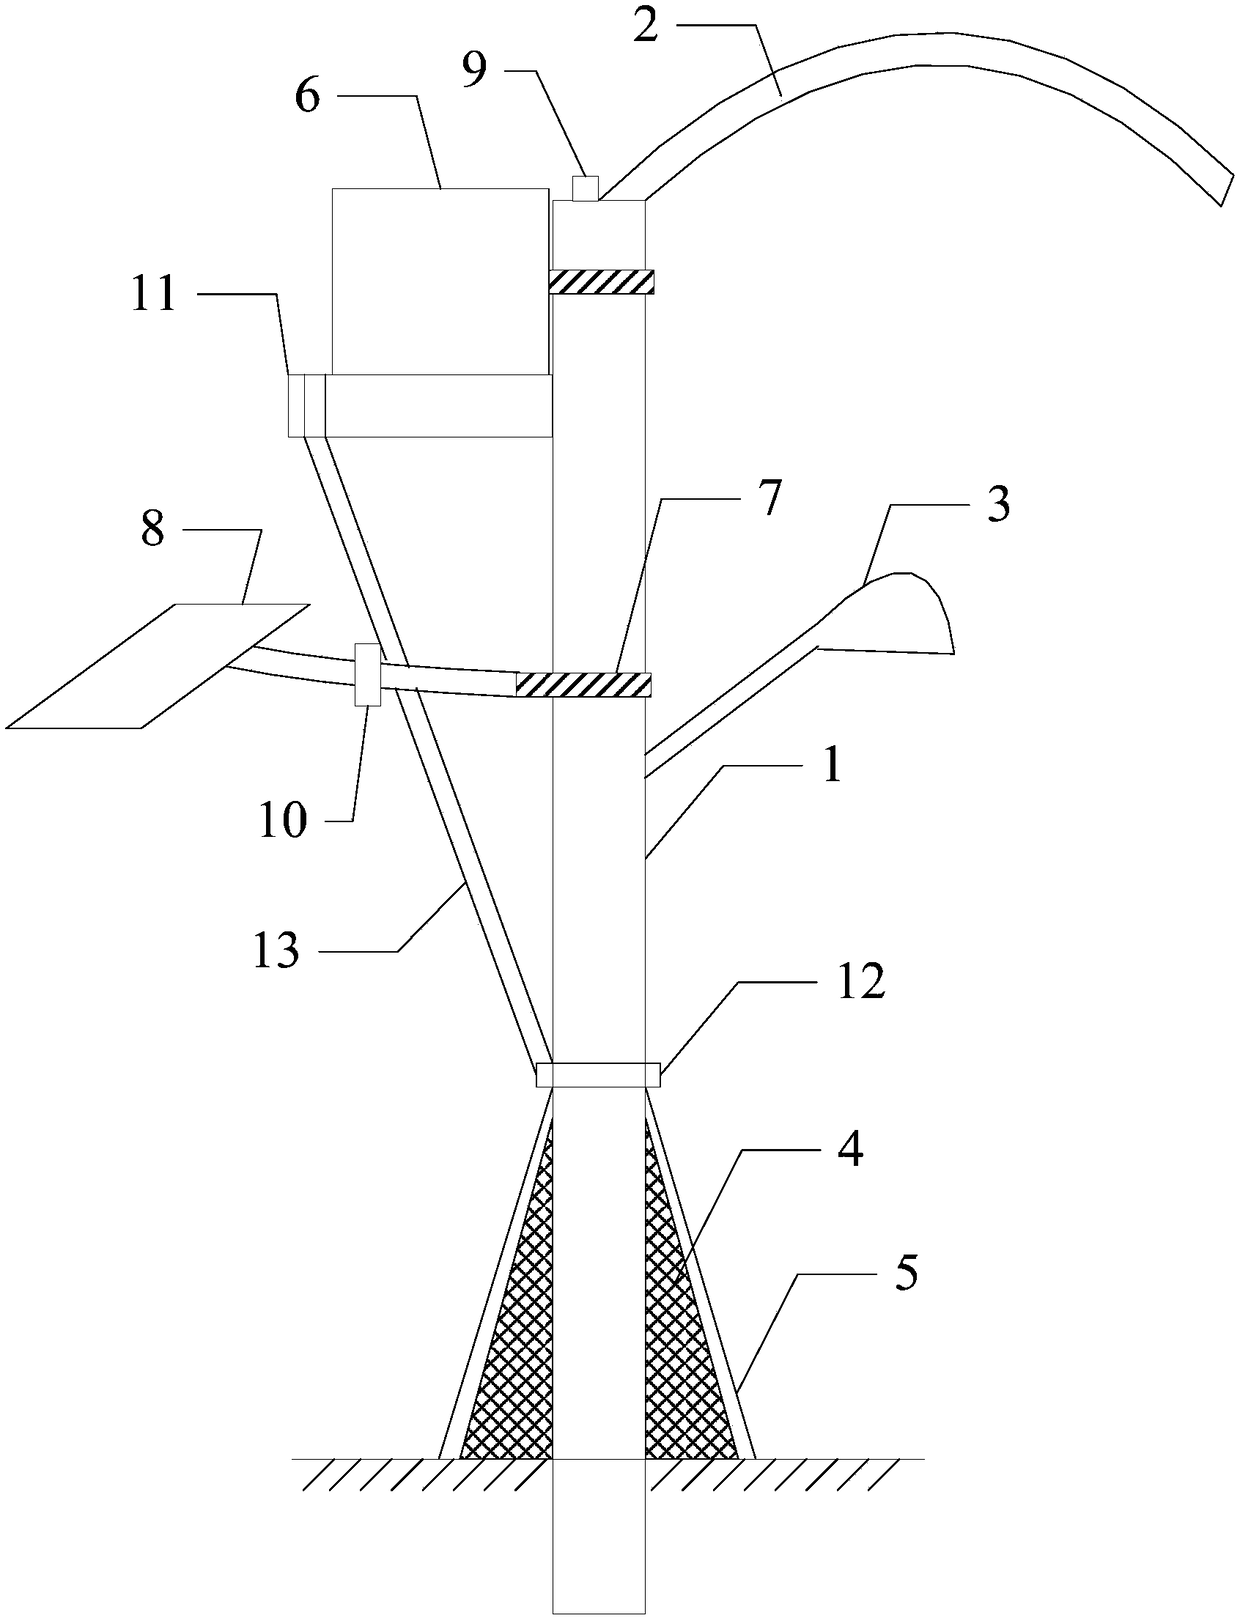 Communication base station device integrated with multifunctional street light pole